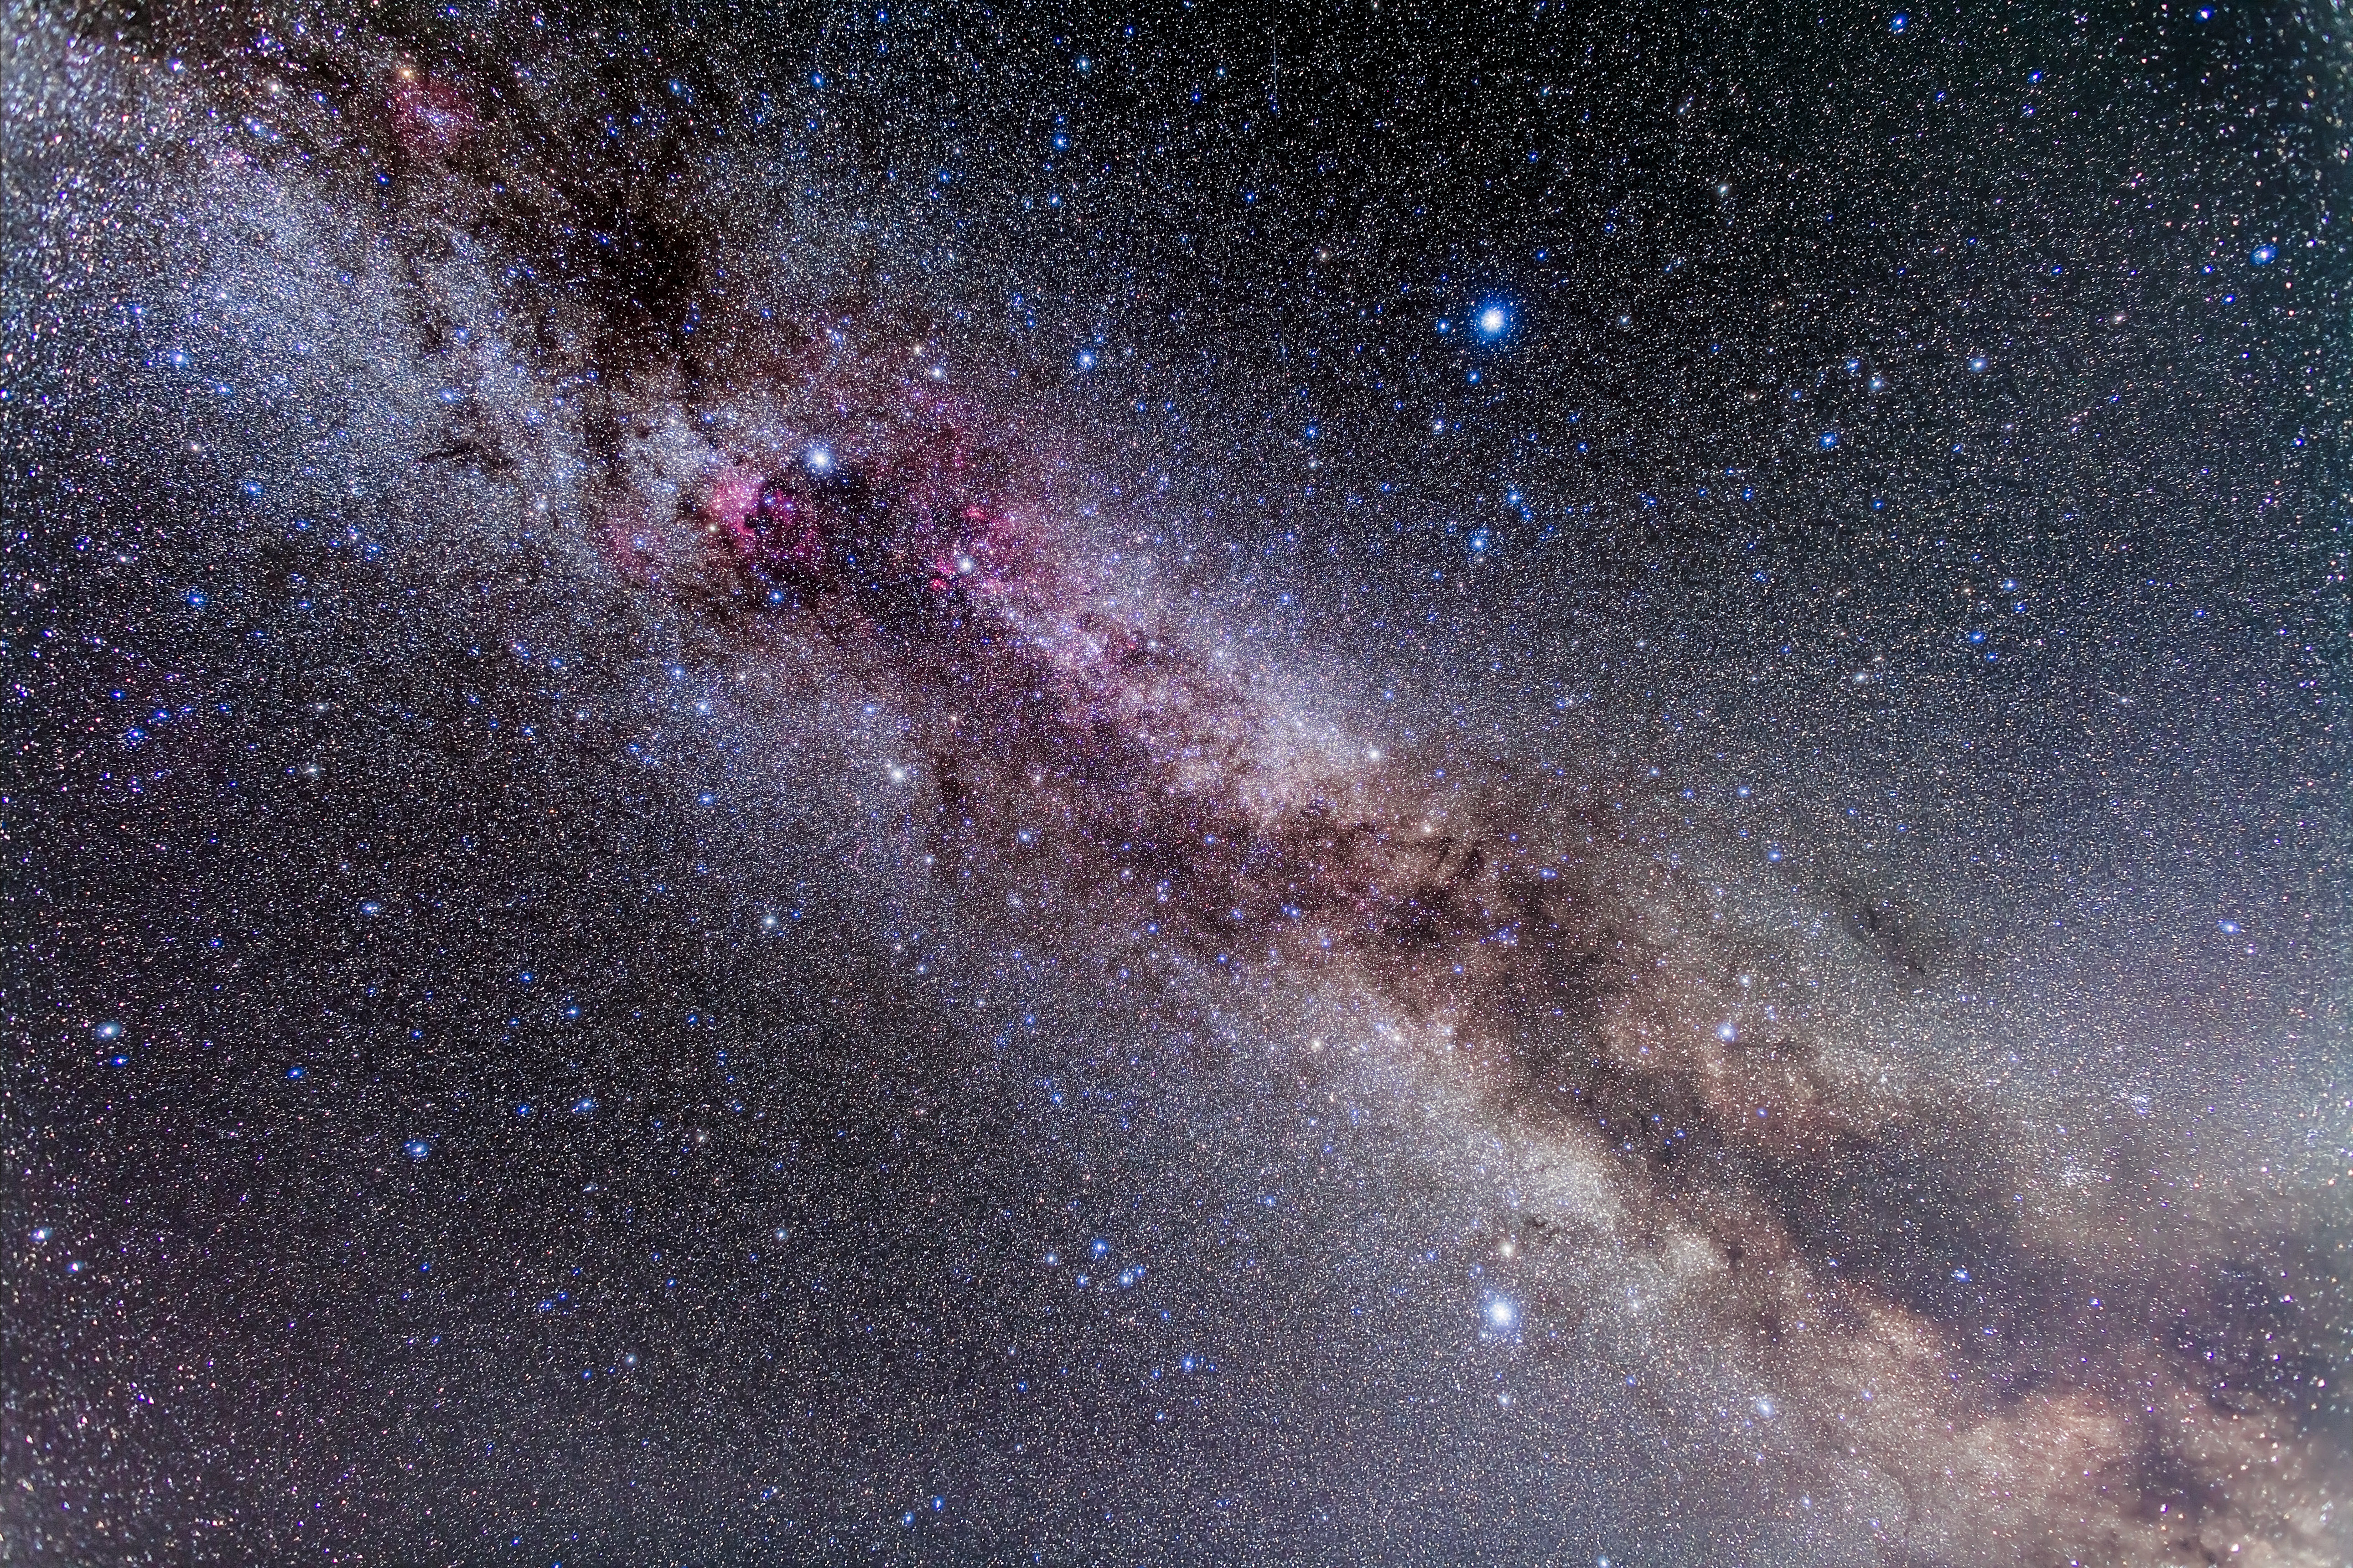 The Summer Triangle stars in the Milky Way through Cygnus, Lyra and Aquila. The frame takes in the Milky Way from Cepheus to Ophiuchus